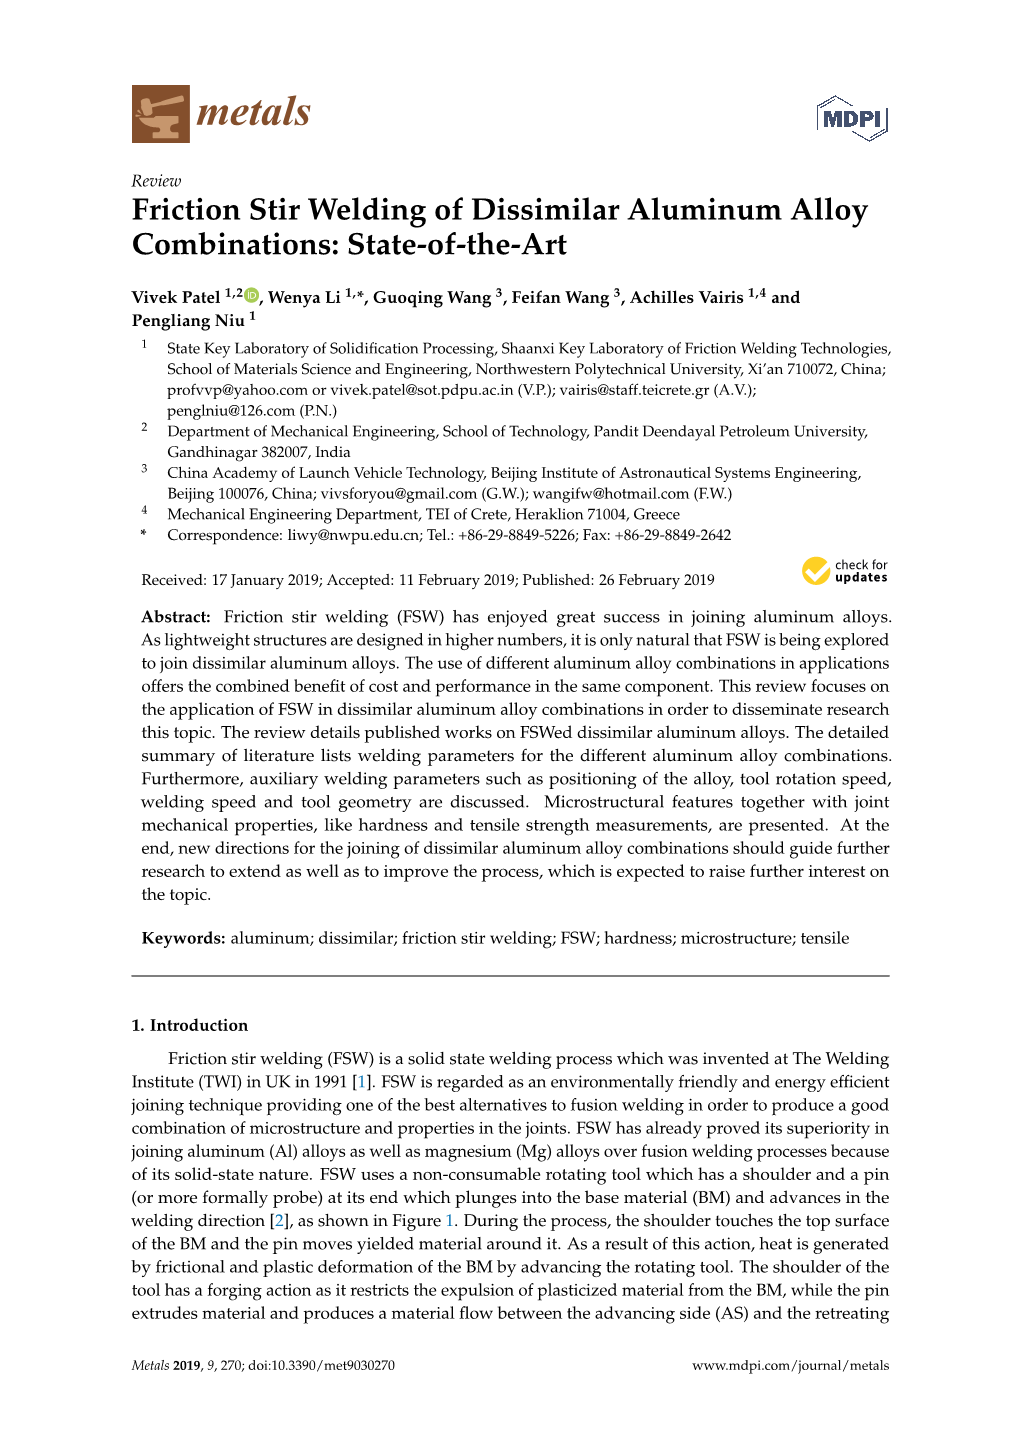 Friction Stir Welding of Dissimilar Aluminum Alloy Combinations: State-Of-The-Art